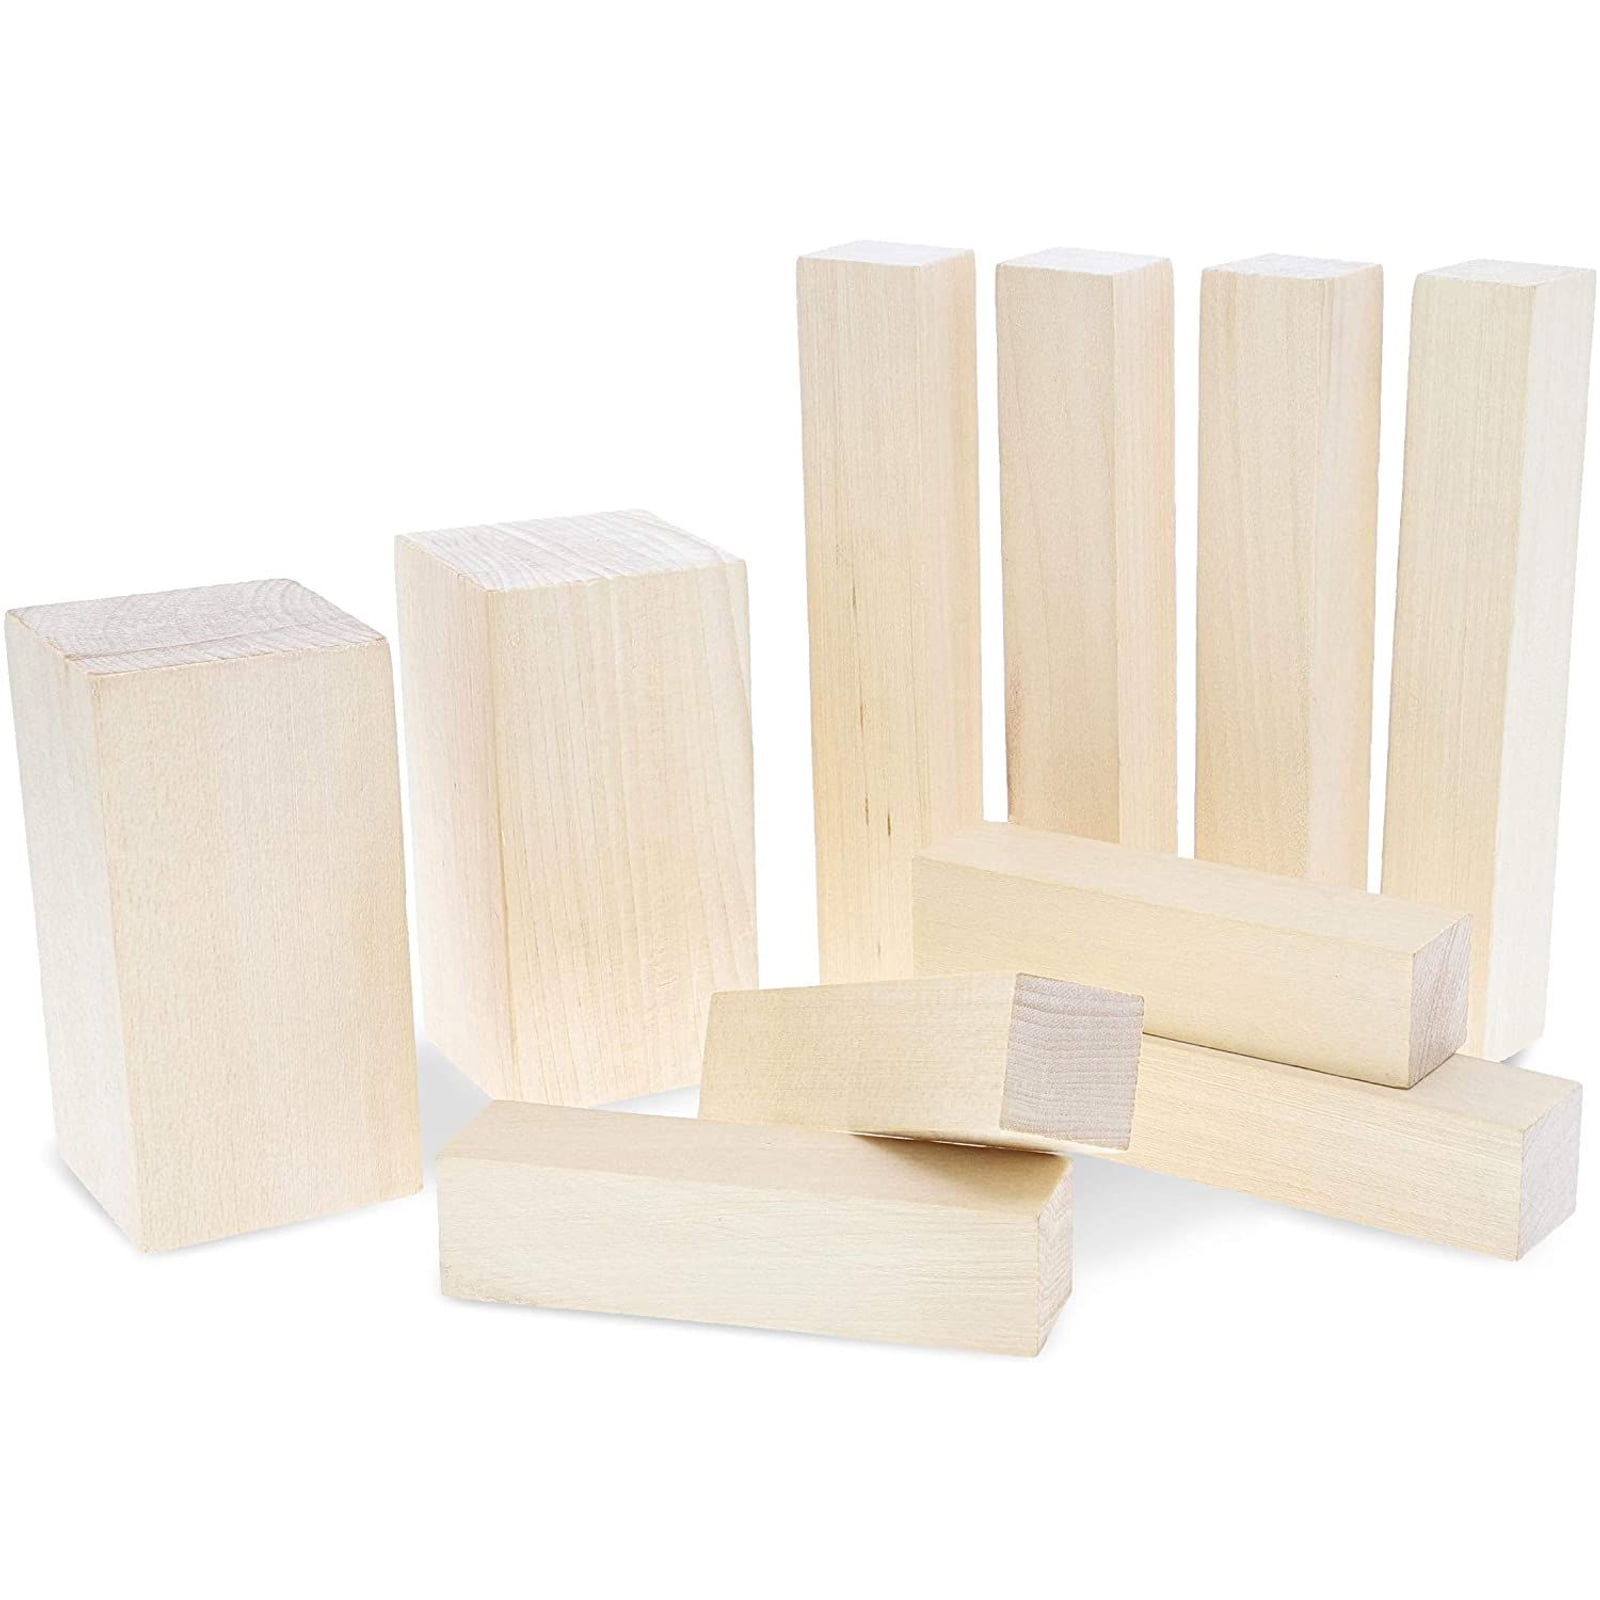 10 Pcs Basswood Carving Blocks Unfinished Wood Blocks DIY Carving Wood Wood Carving Hobby Kit for Carving Beginners and Professional Woodwork Materials Two Size 